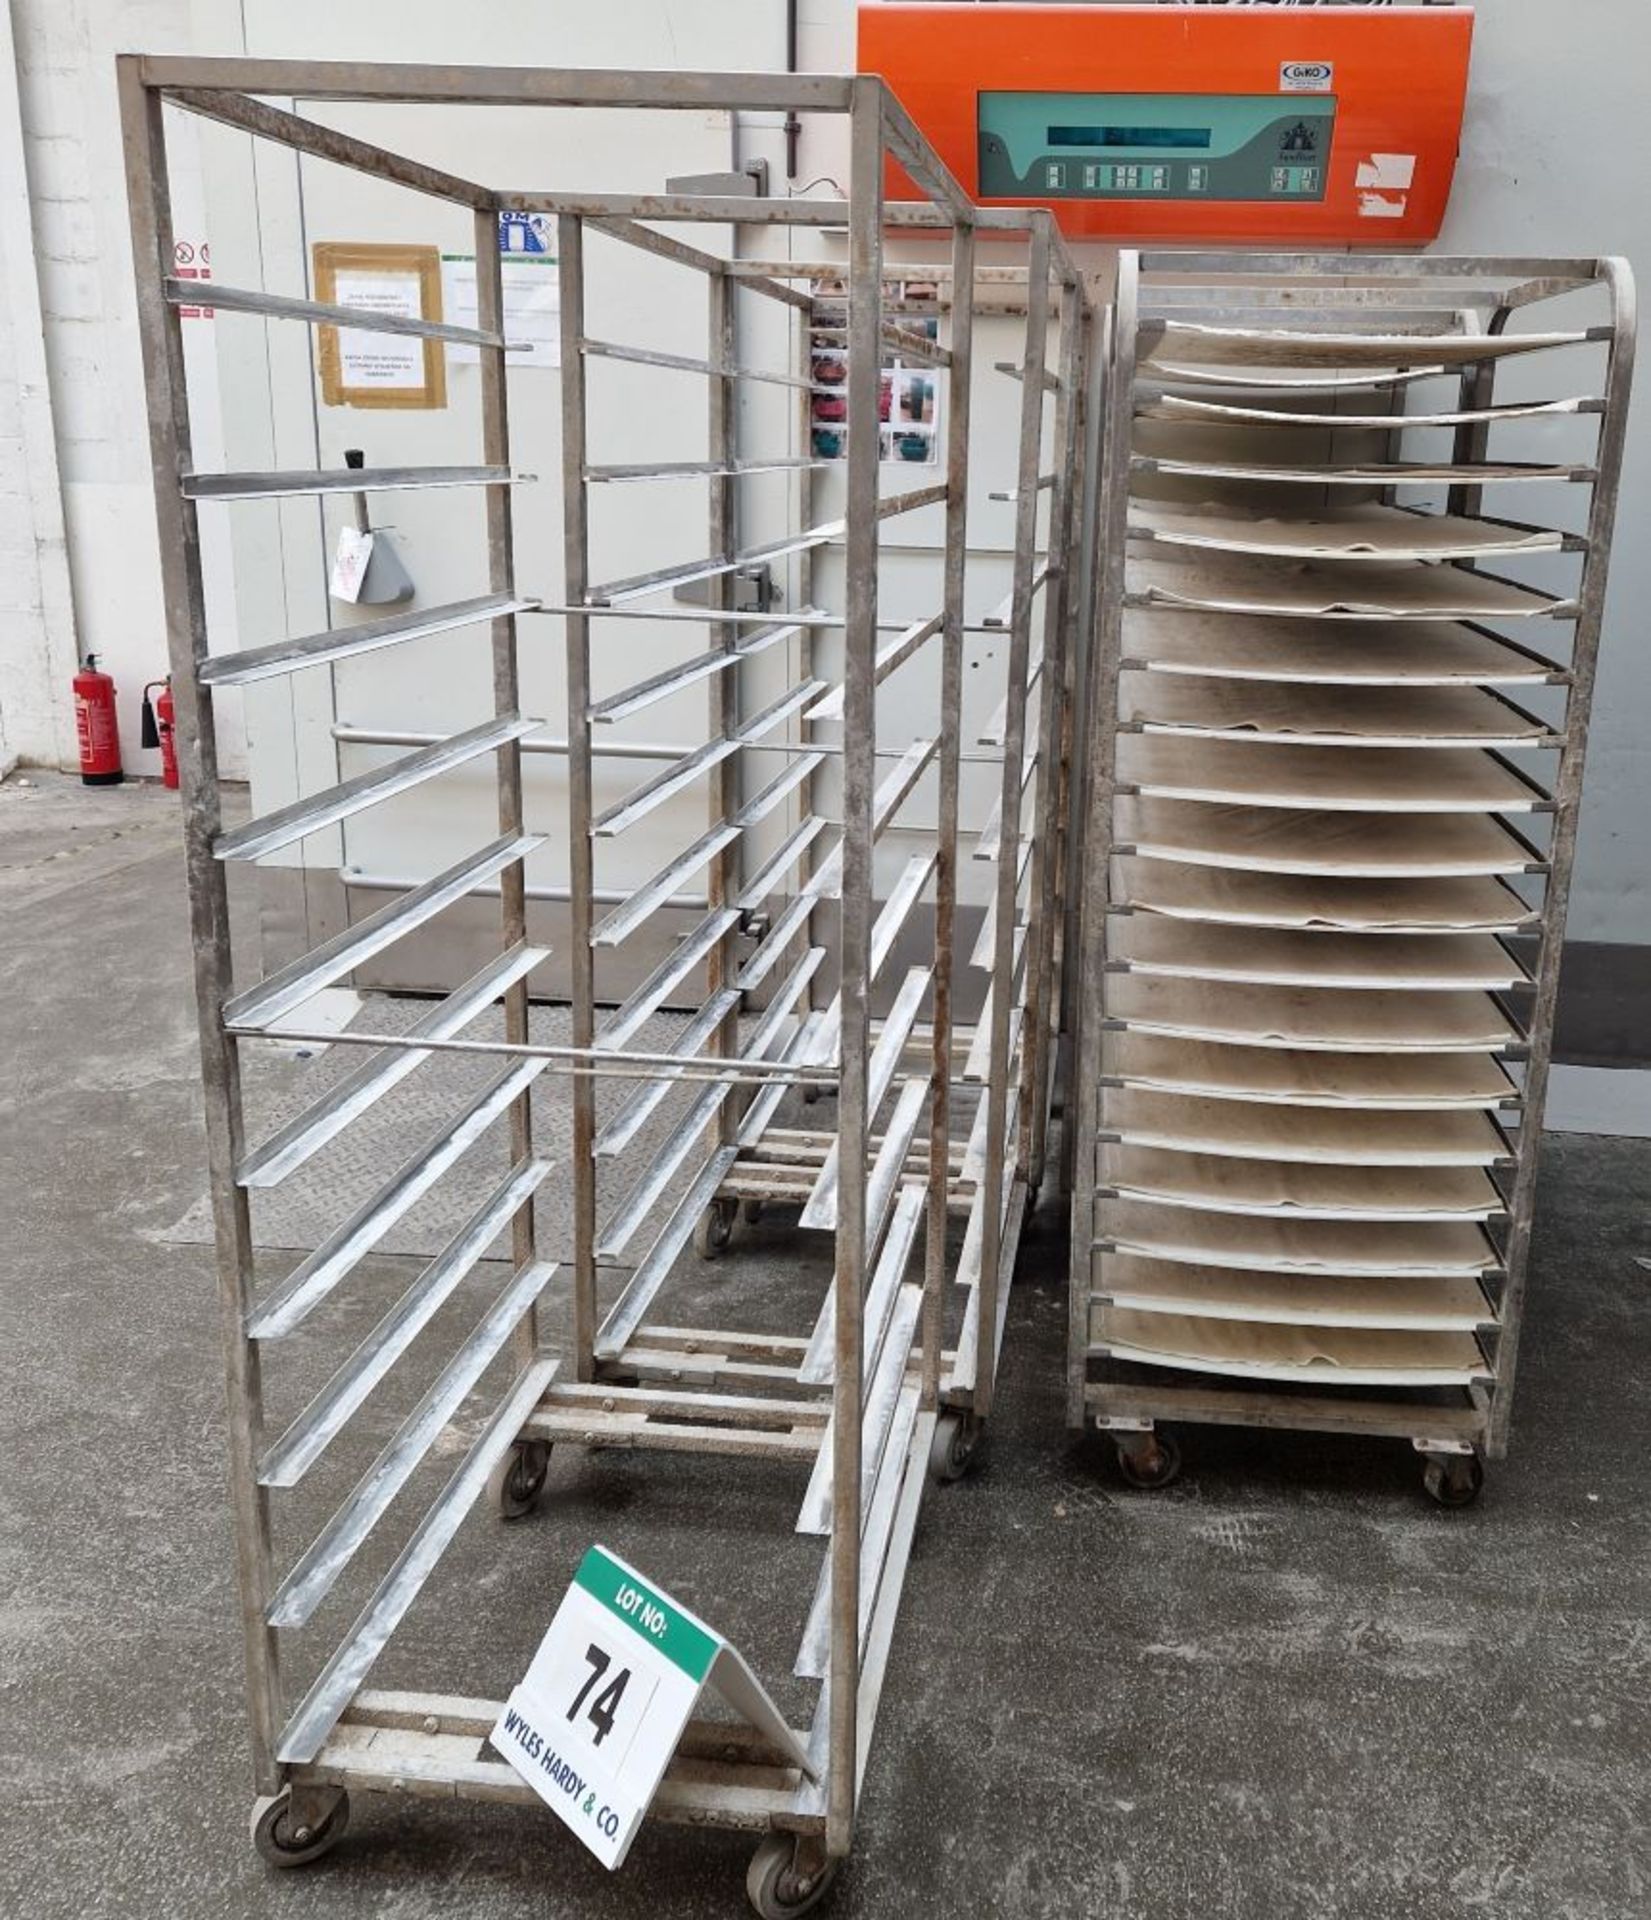 Three Stainless Steel 10-Tier Trolleys, each approx. 800mm x 830mm x 1830mm tall, Two Stainless